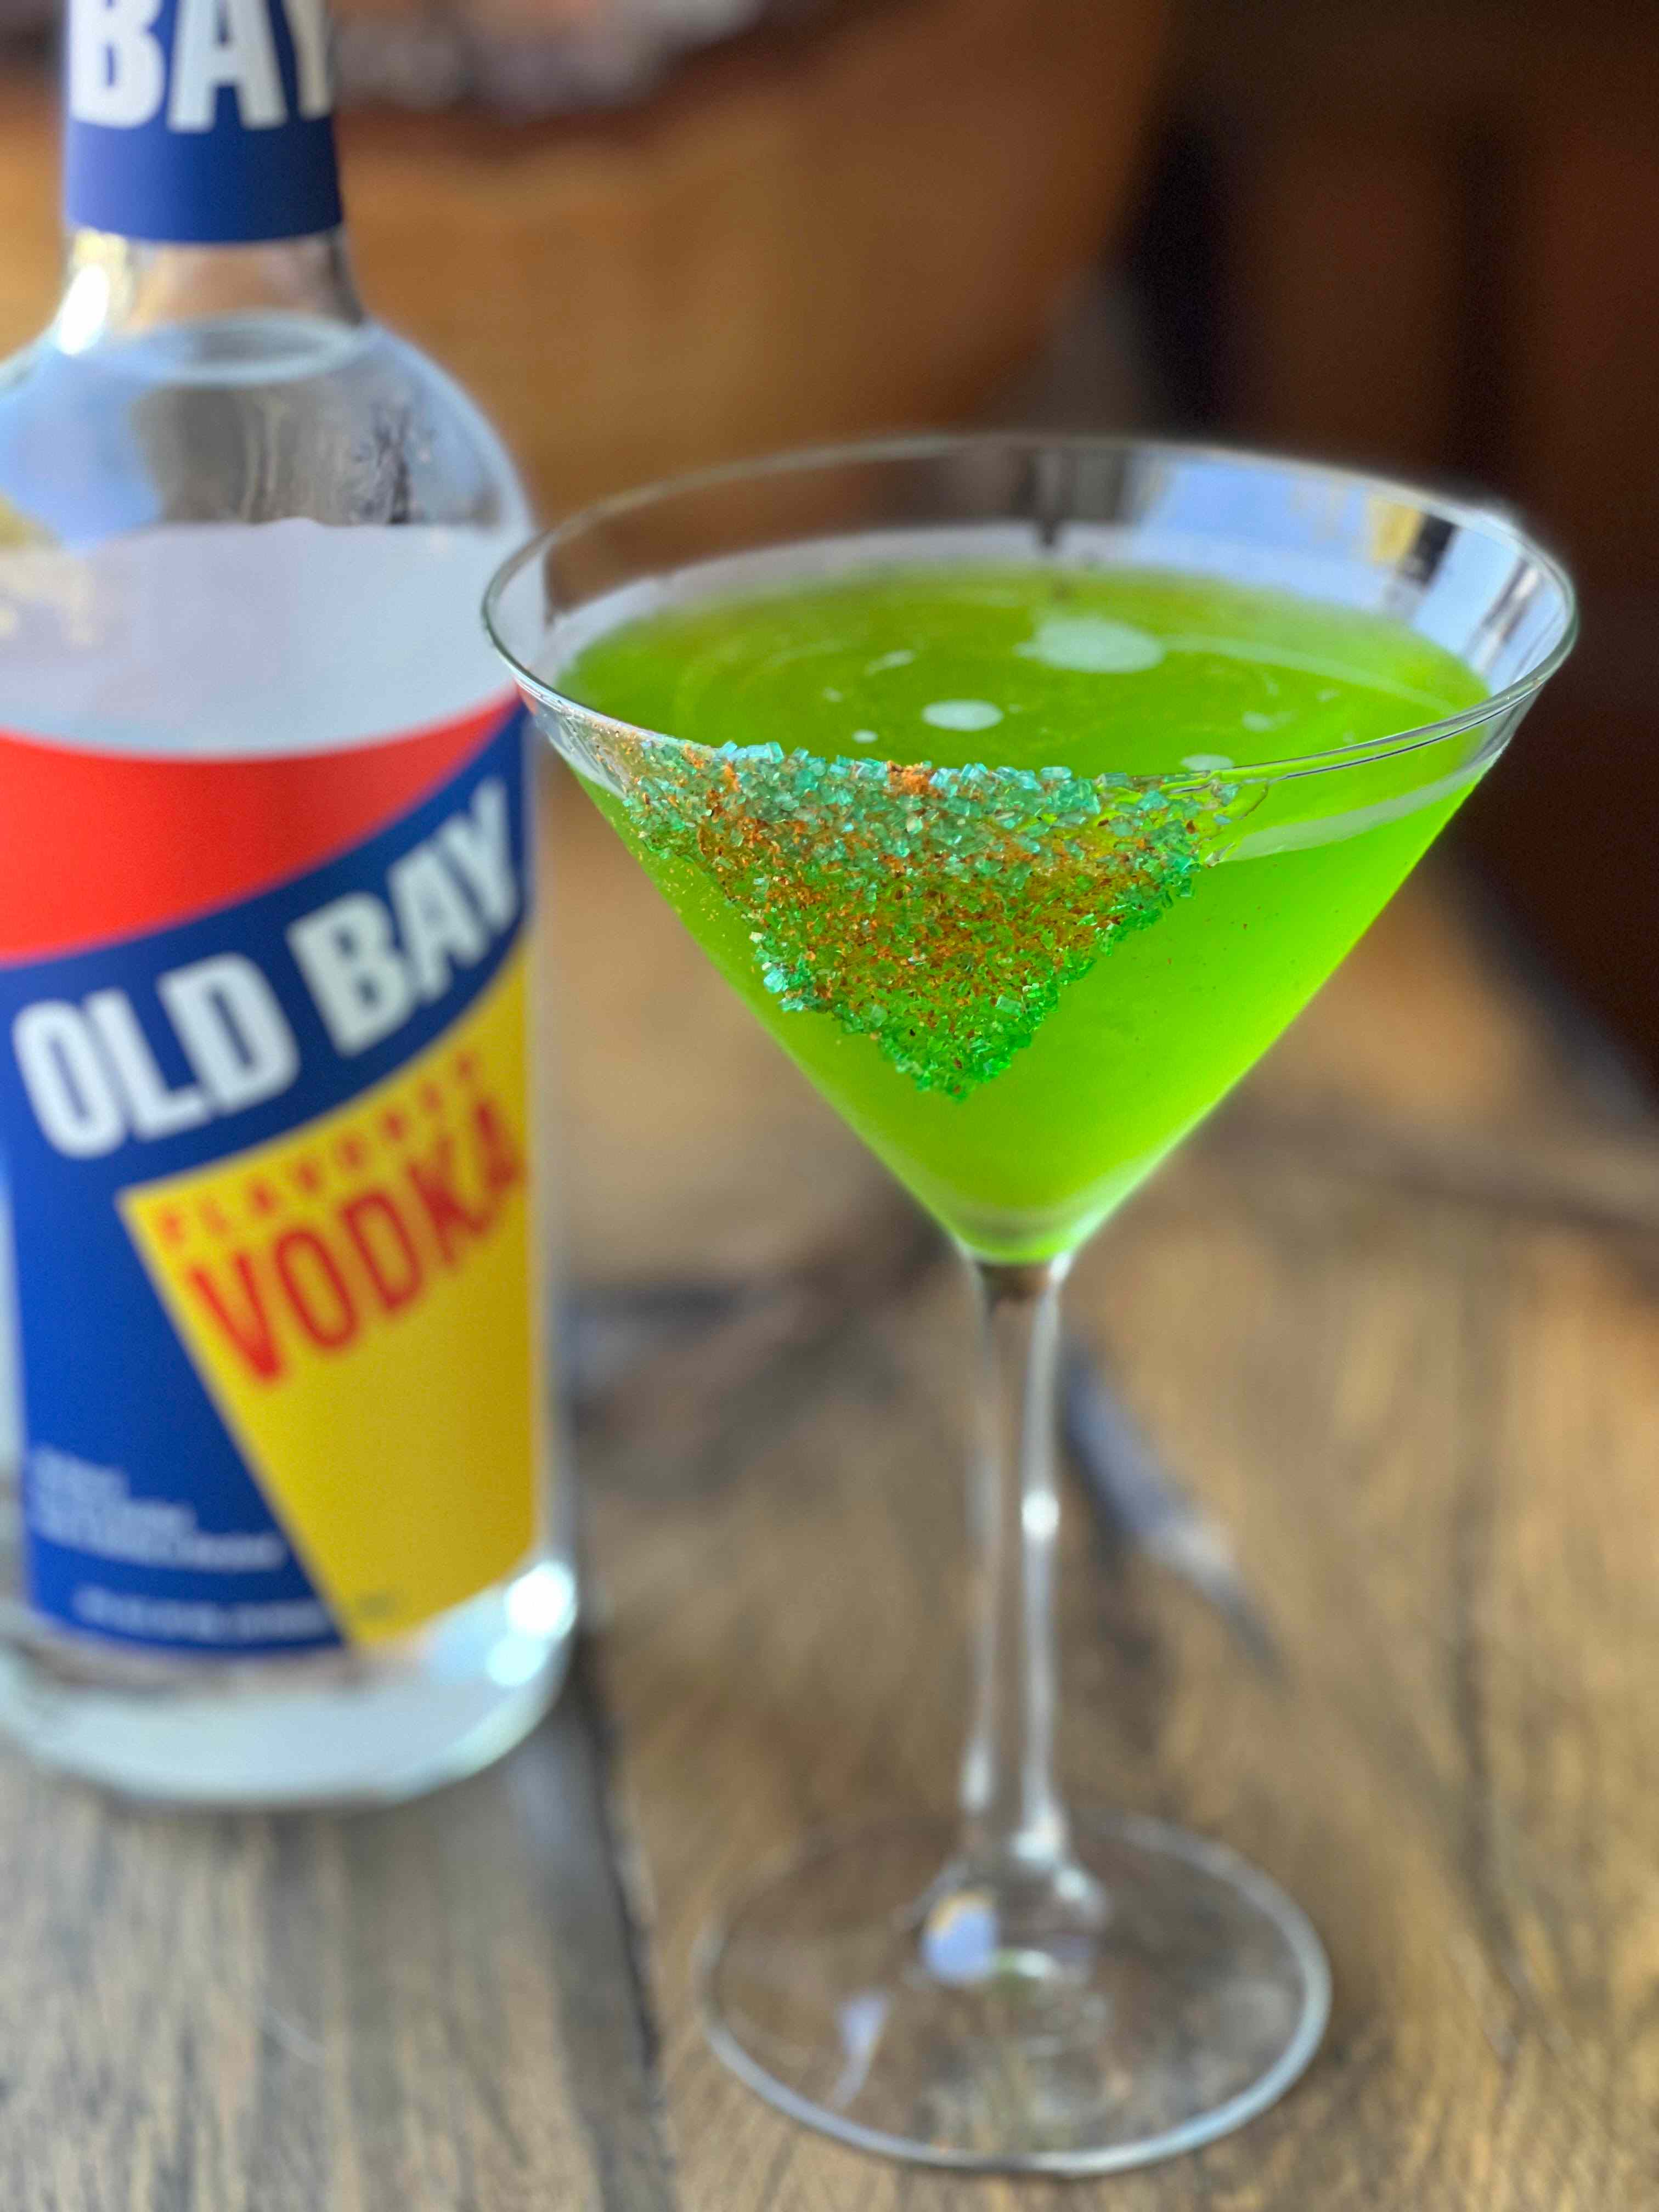 green martini with old bay vodka bottle